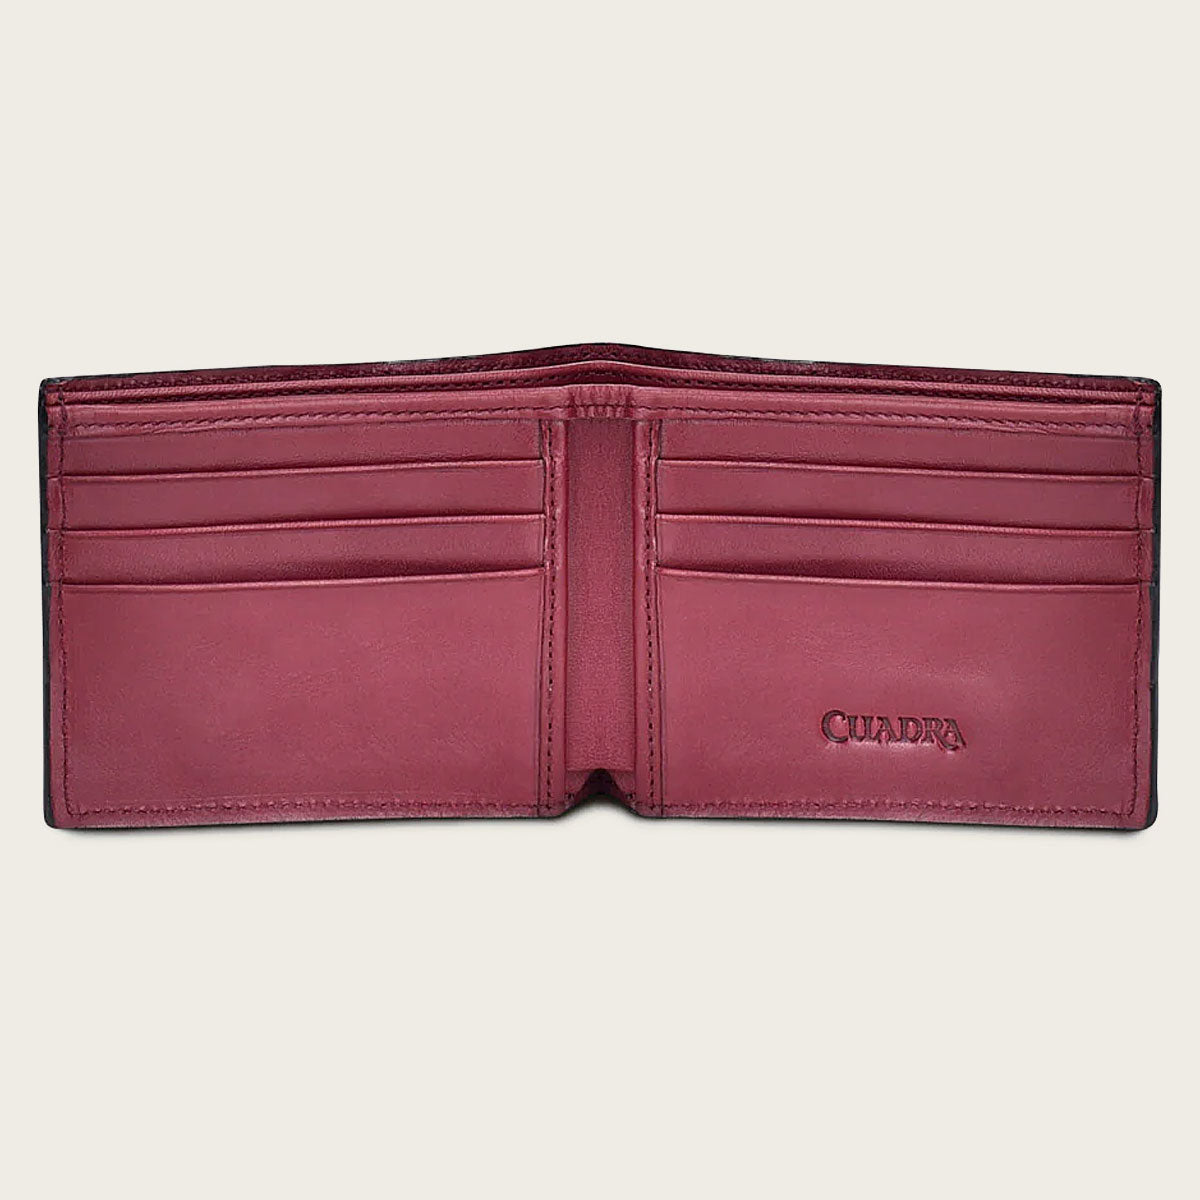 High quality handcrafted bifold wallet